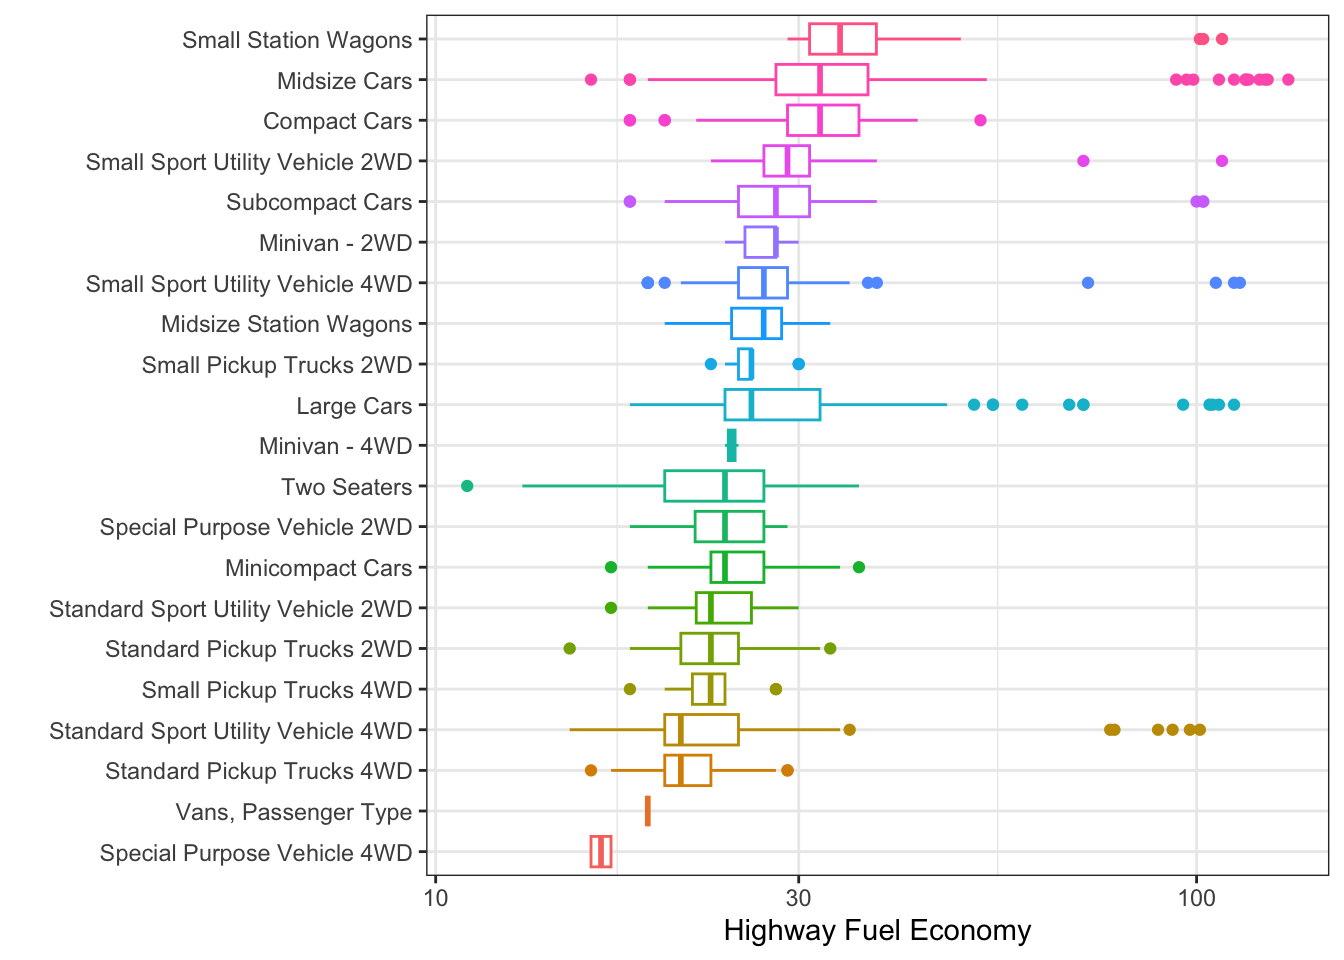 Highway Fuel Economy for 2020 Vehicles by Type